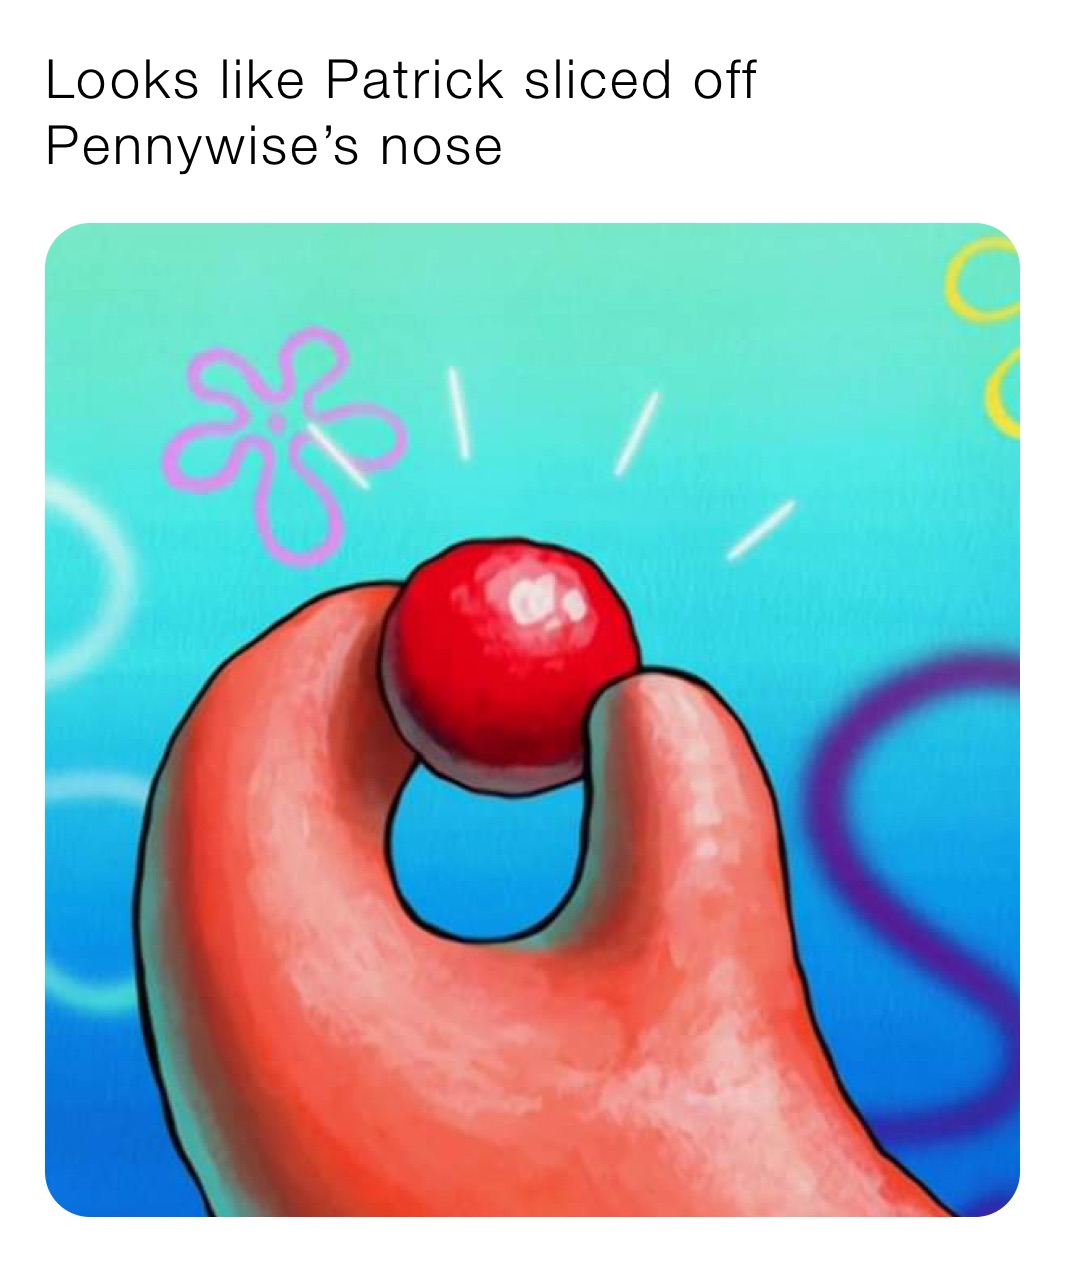 Looks like Patrick sliced off Pennywise’s nose